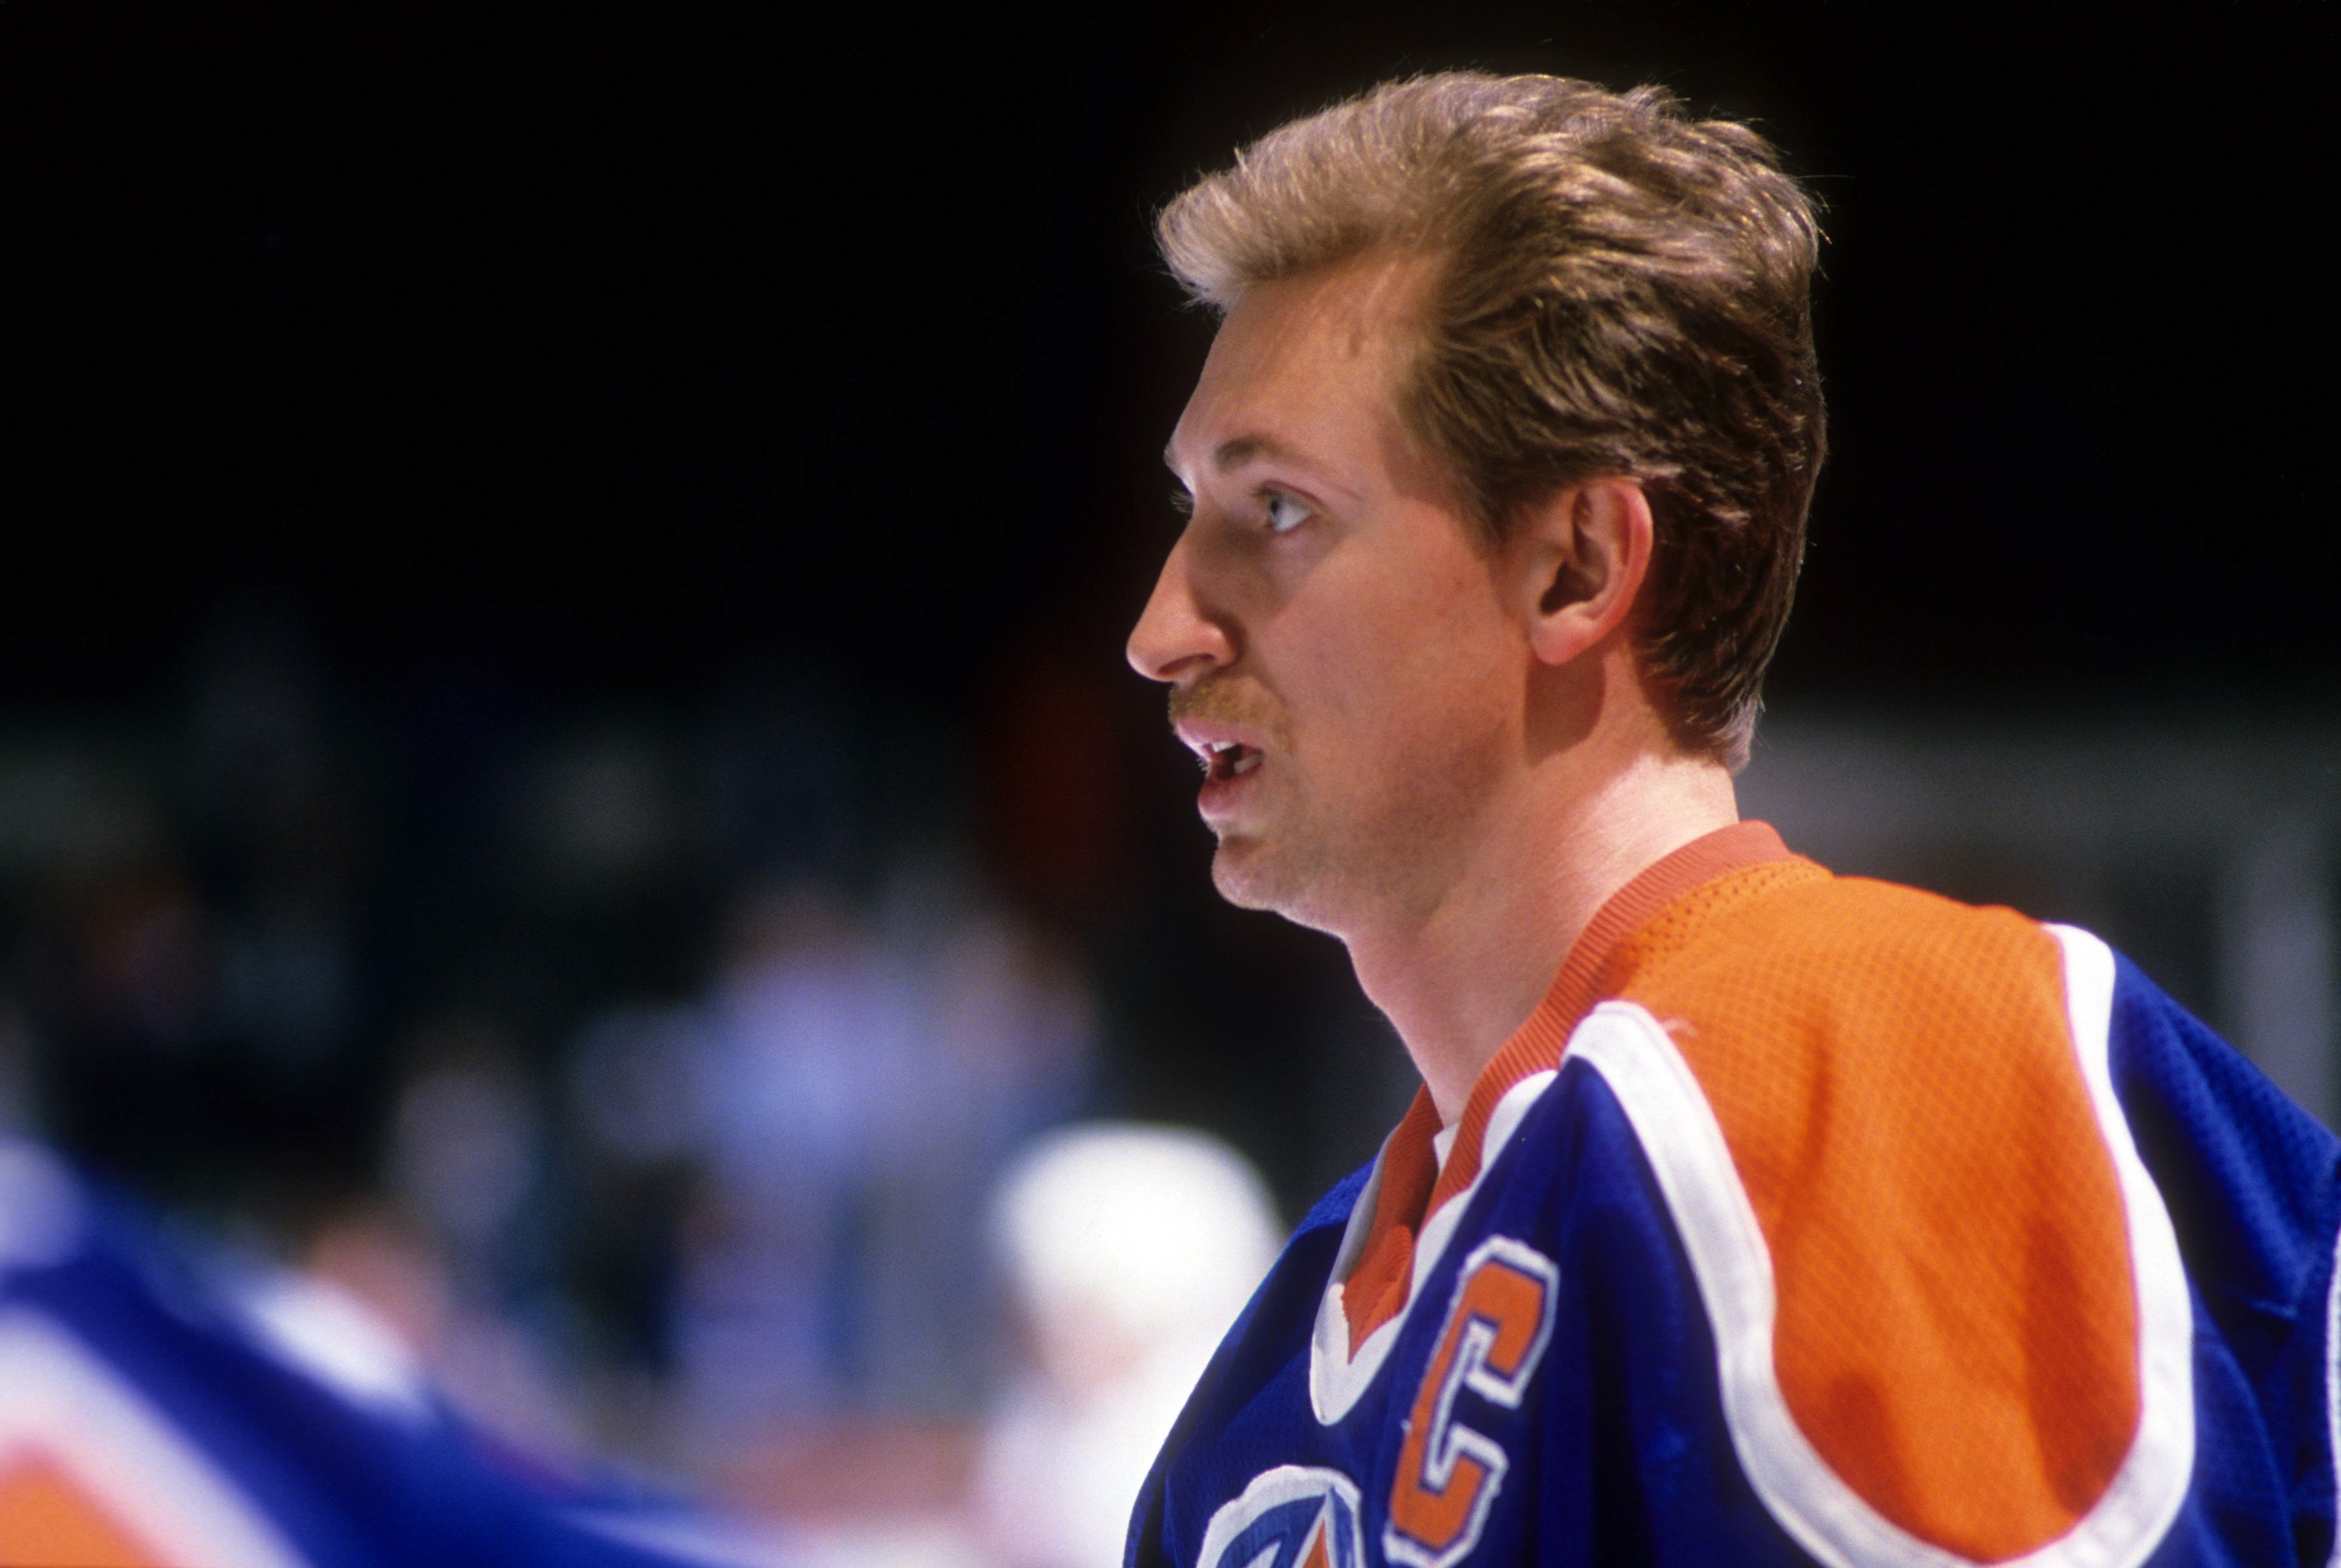 Wayne Gretzky is traded from the Edmonton Oilers to the Los